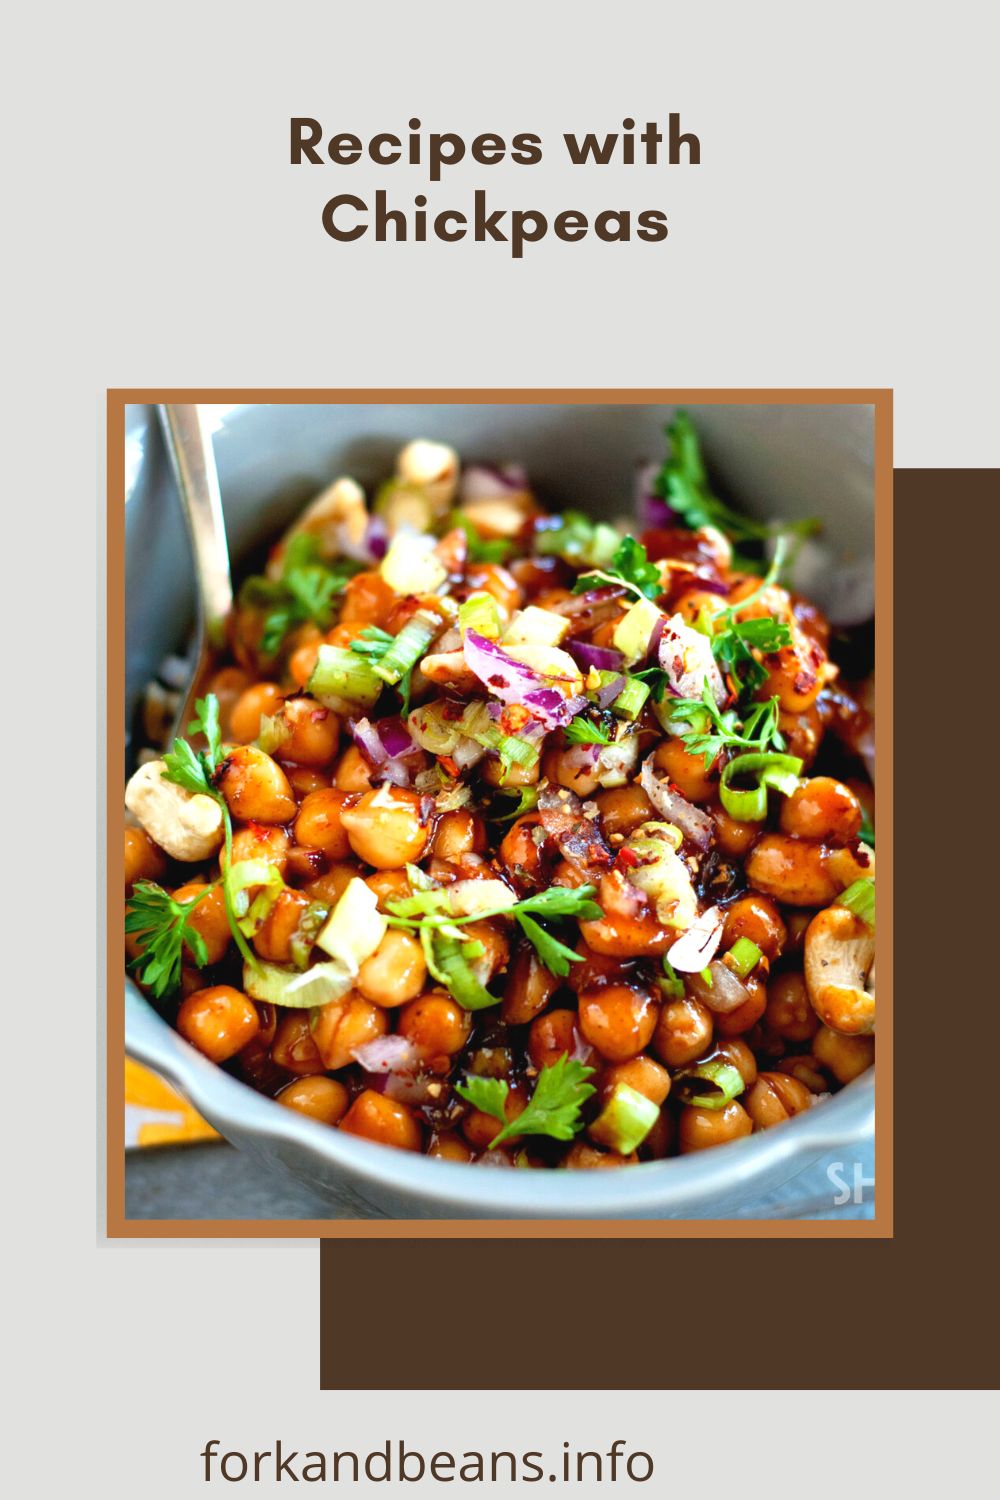 Recipe for kung pao chickpeas